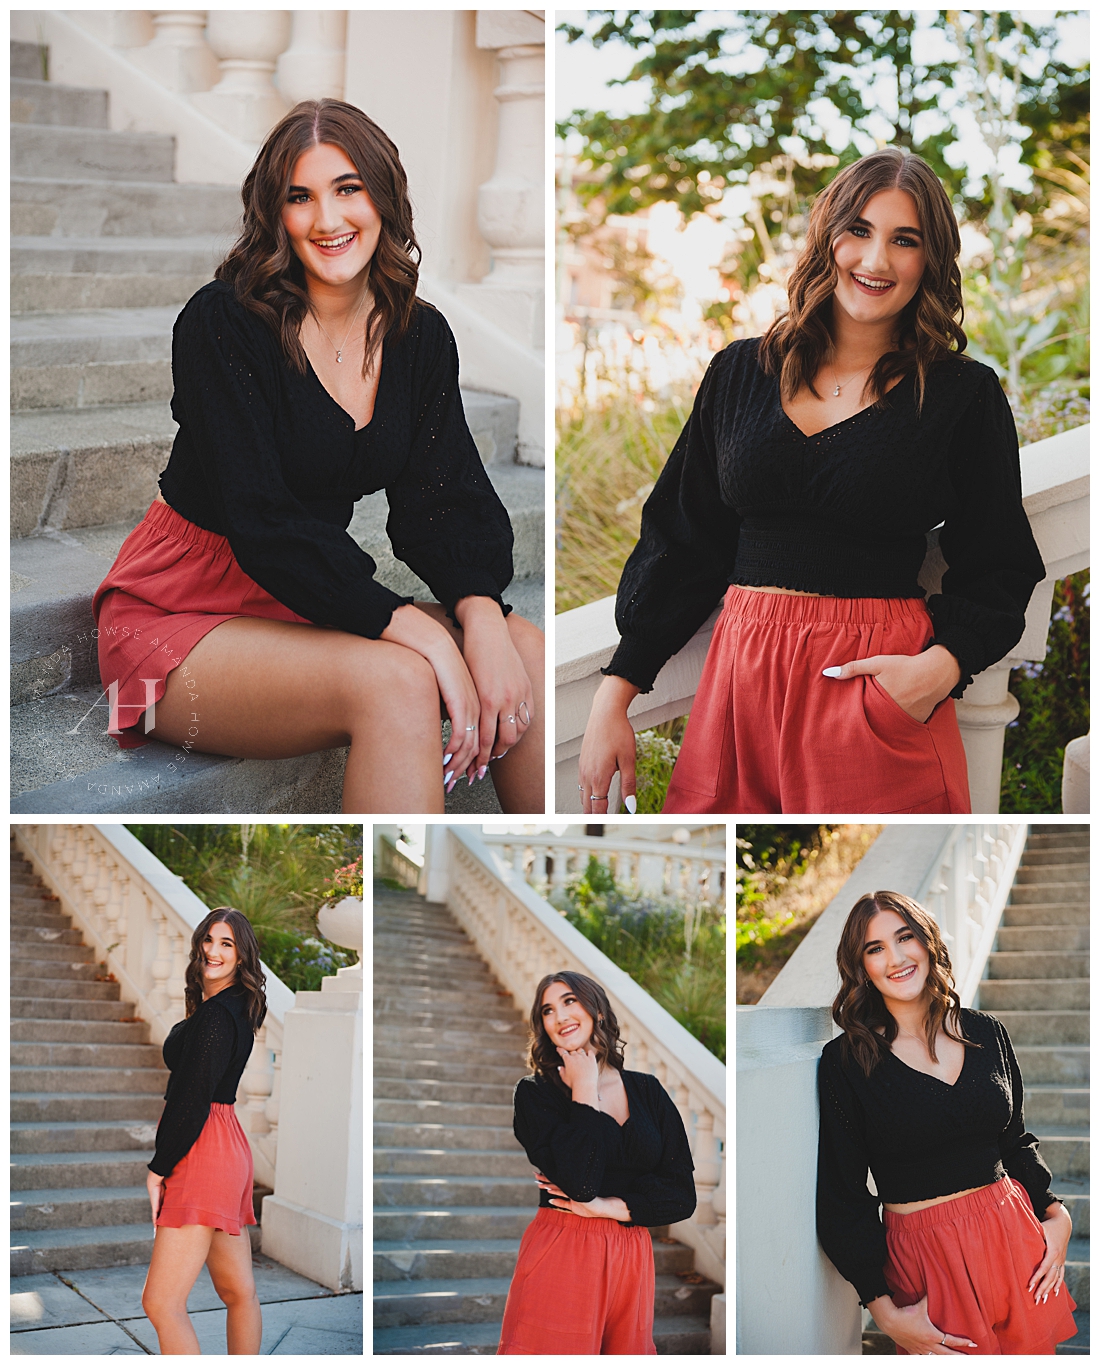 Opera Alley Senior Photos with Cute Outfits | Photographed by the Best Tacoma Senior Photographer Amanda Howse Photography